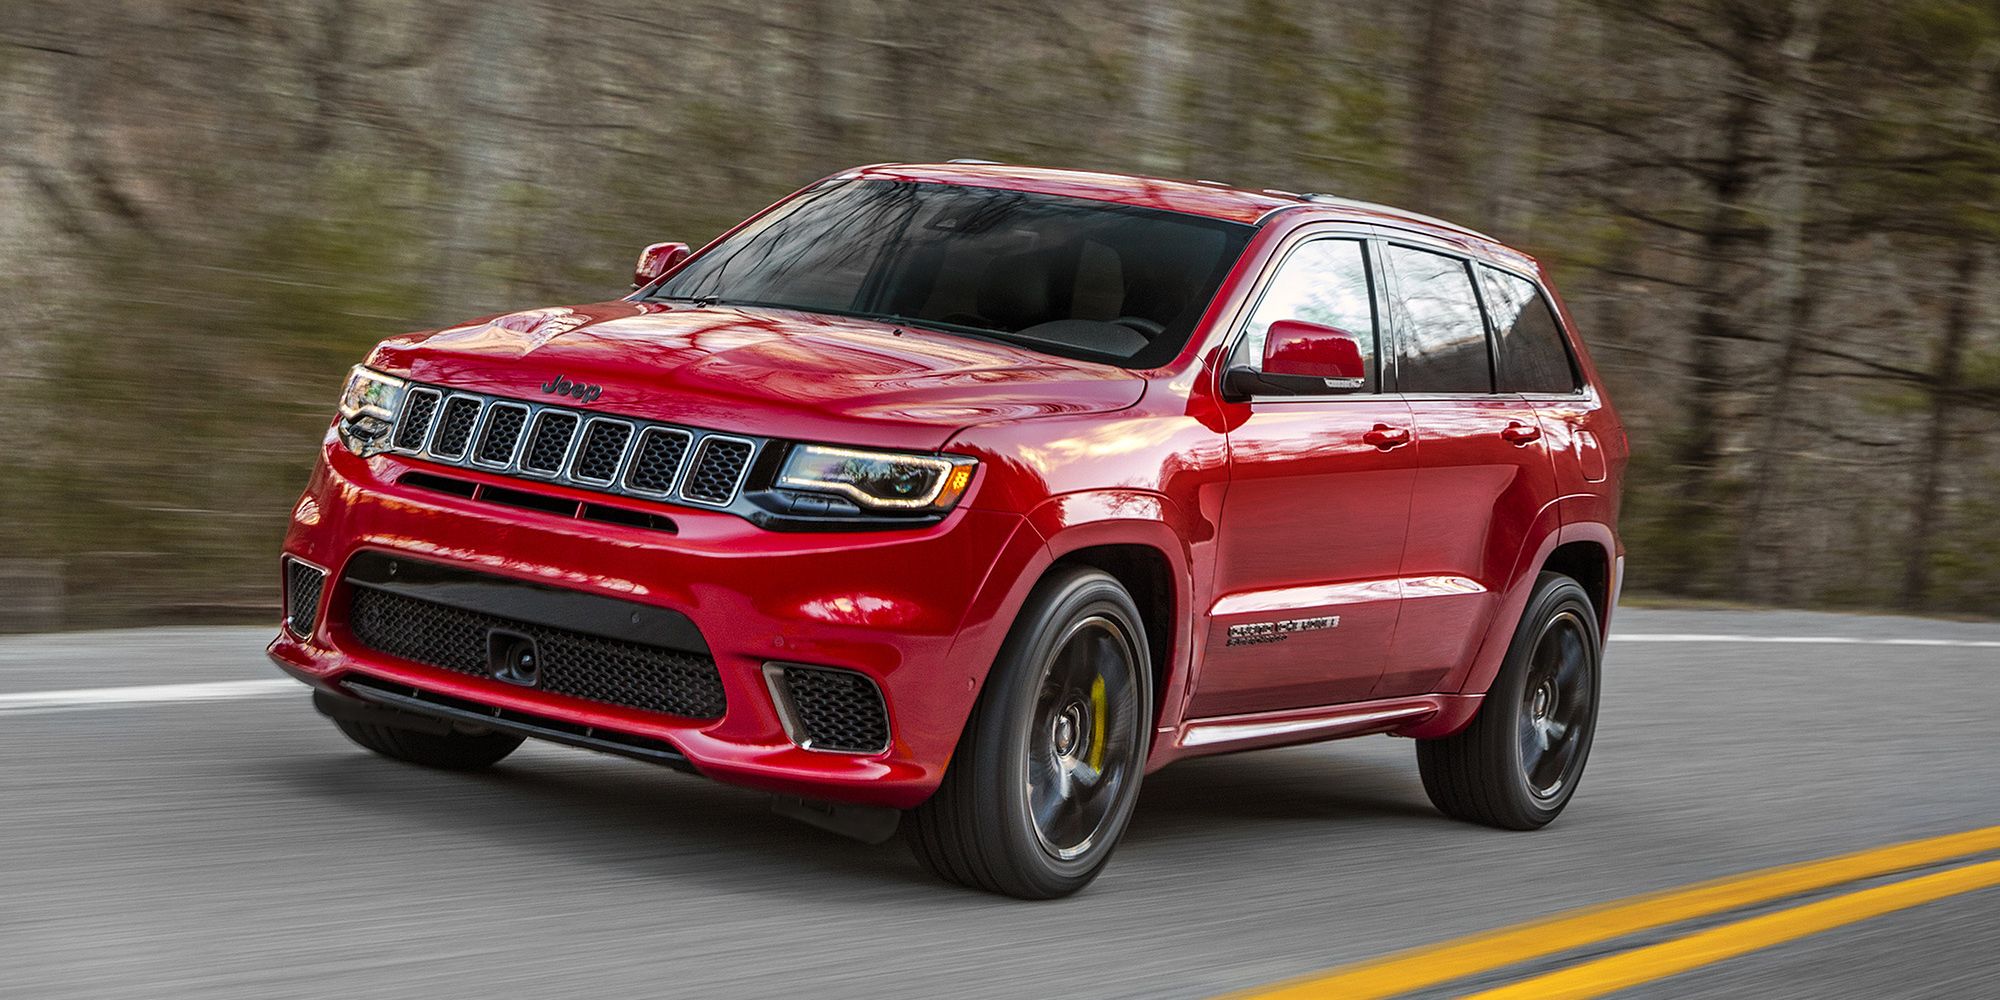 Front 3/4 view of the Jeep Trackhawk on the move